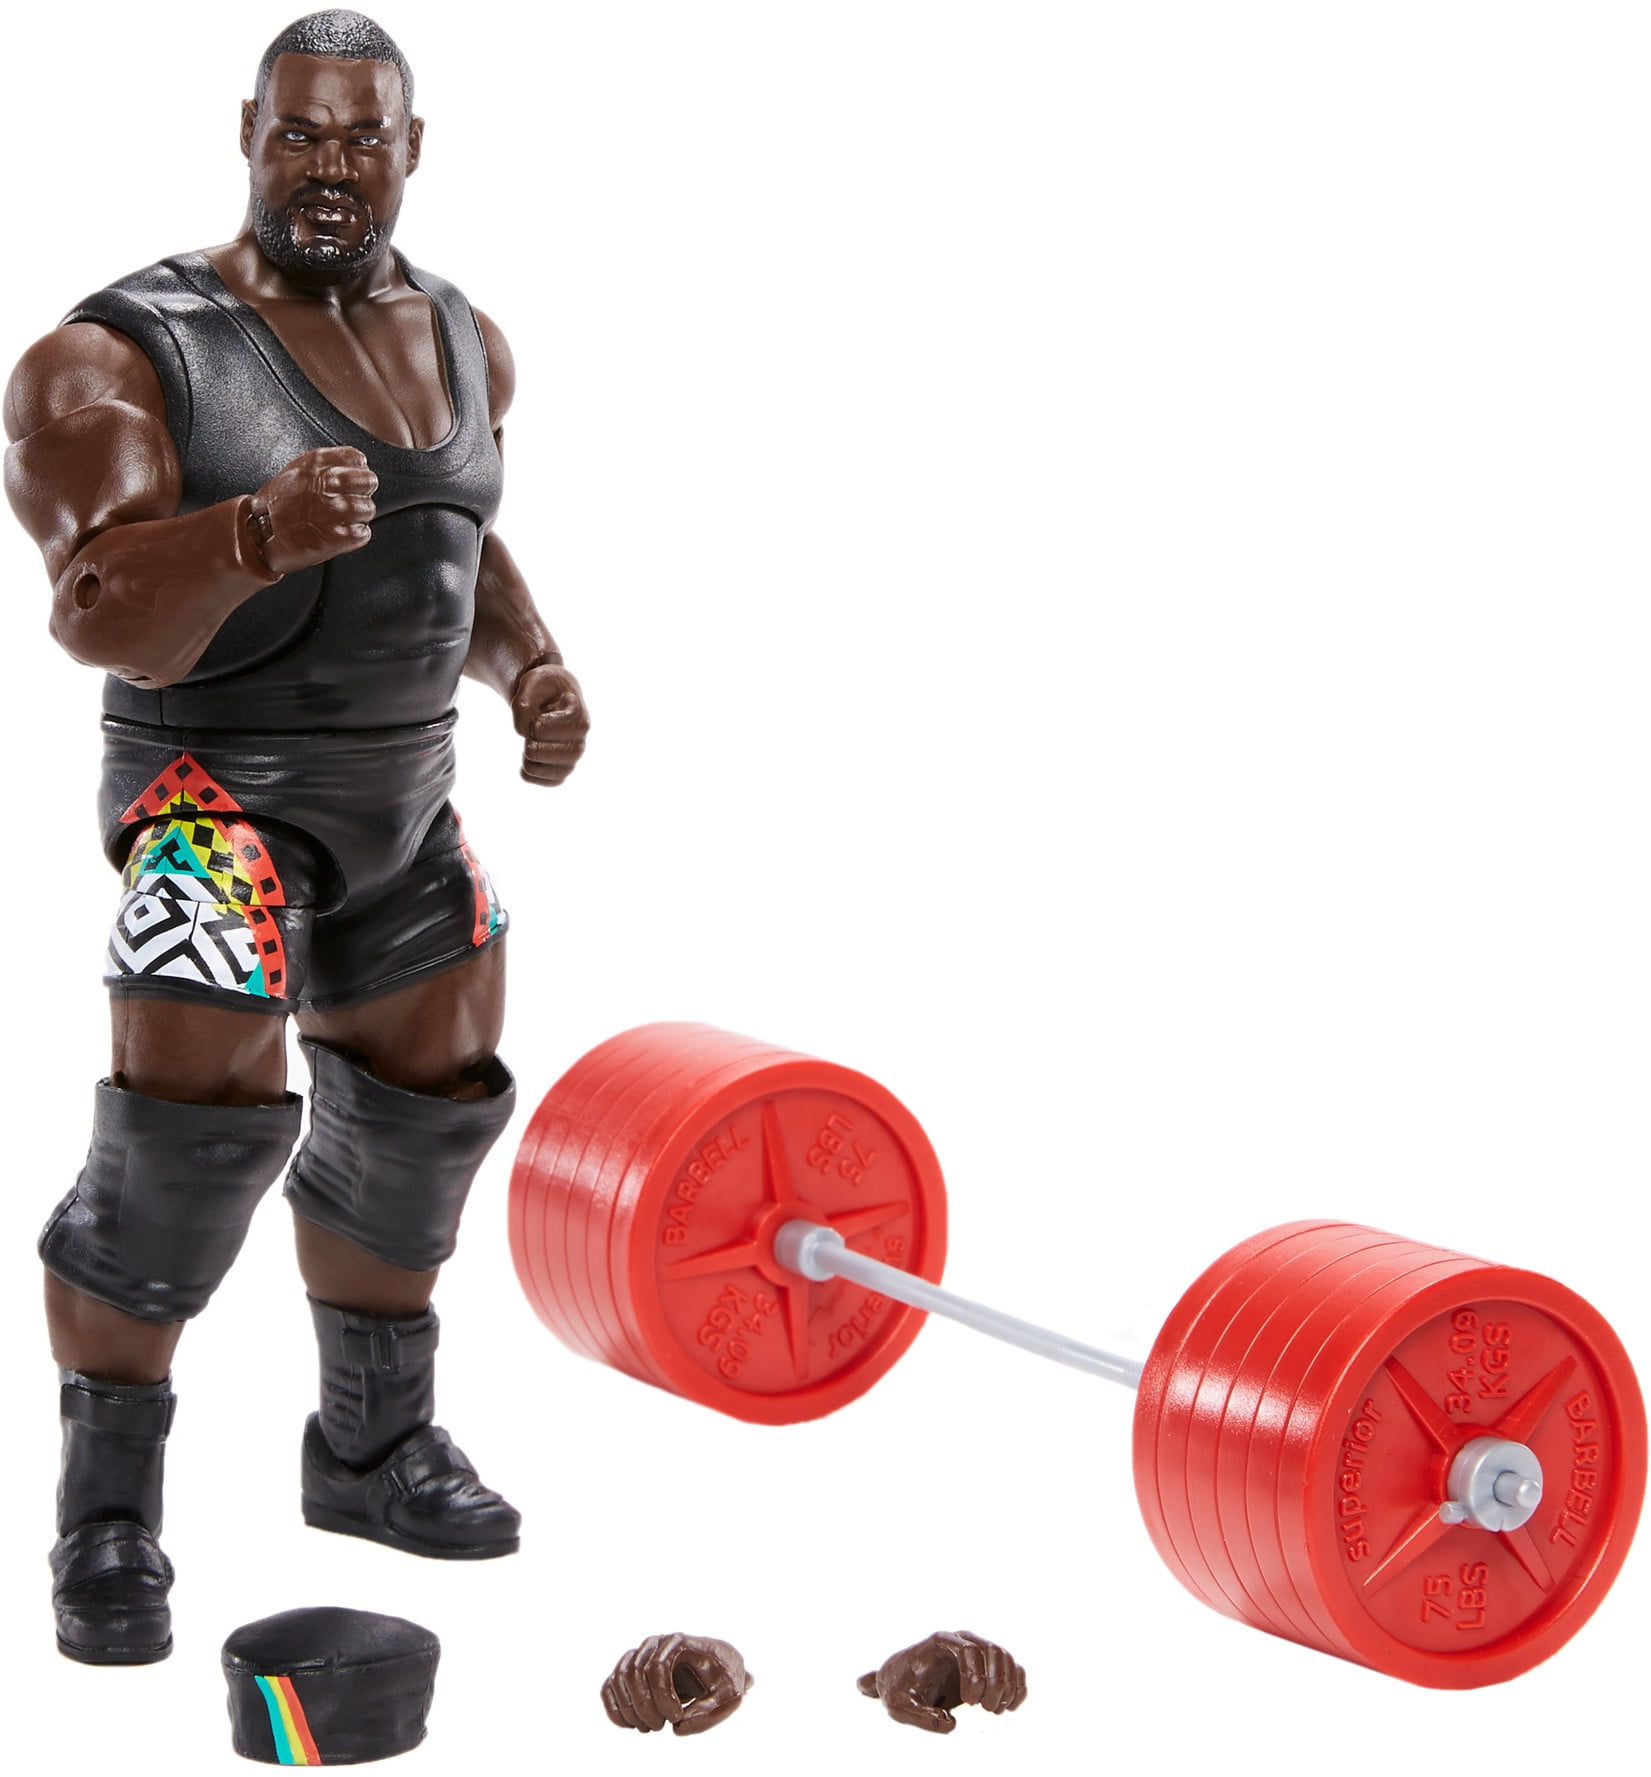 Accessories for WWE Wrestling Figures Mattel Red Barbell Weights 